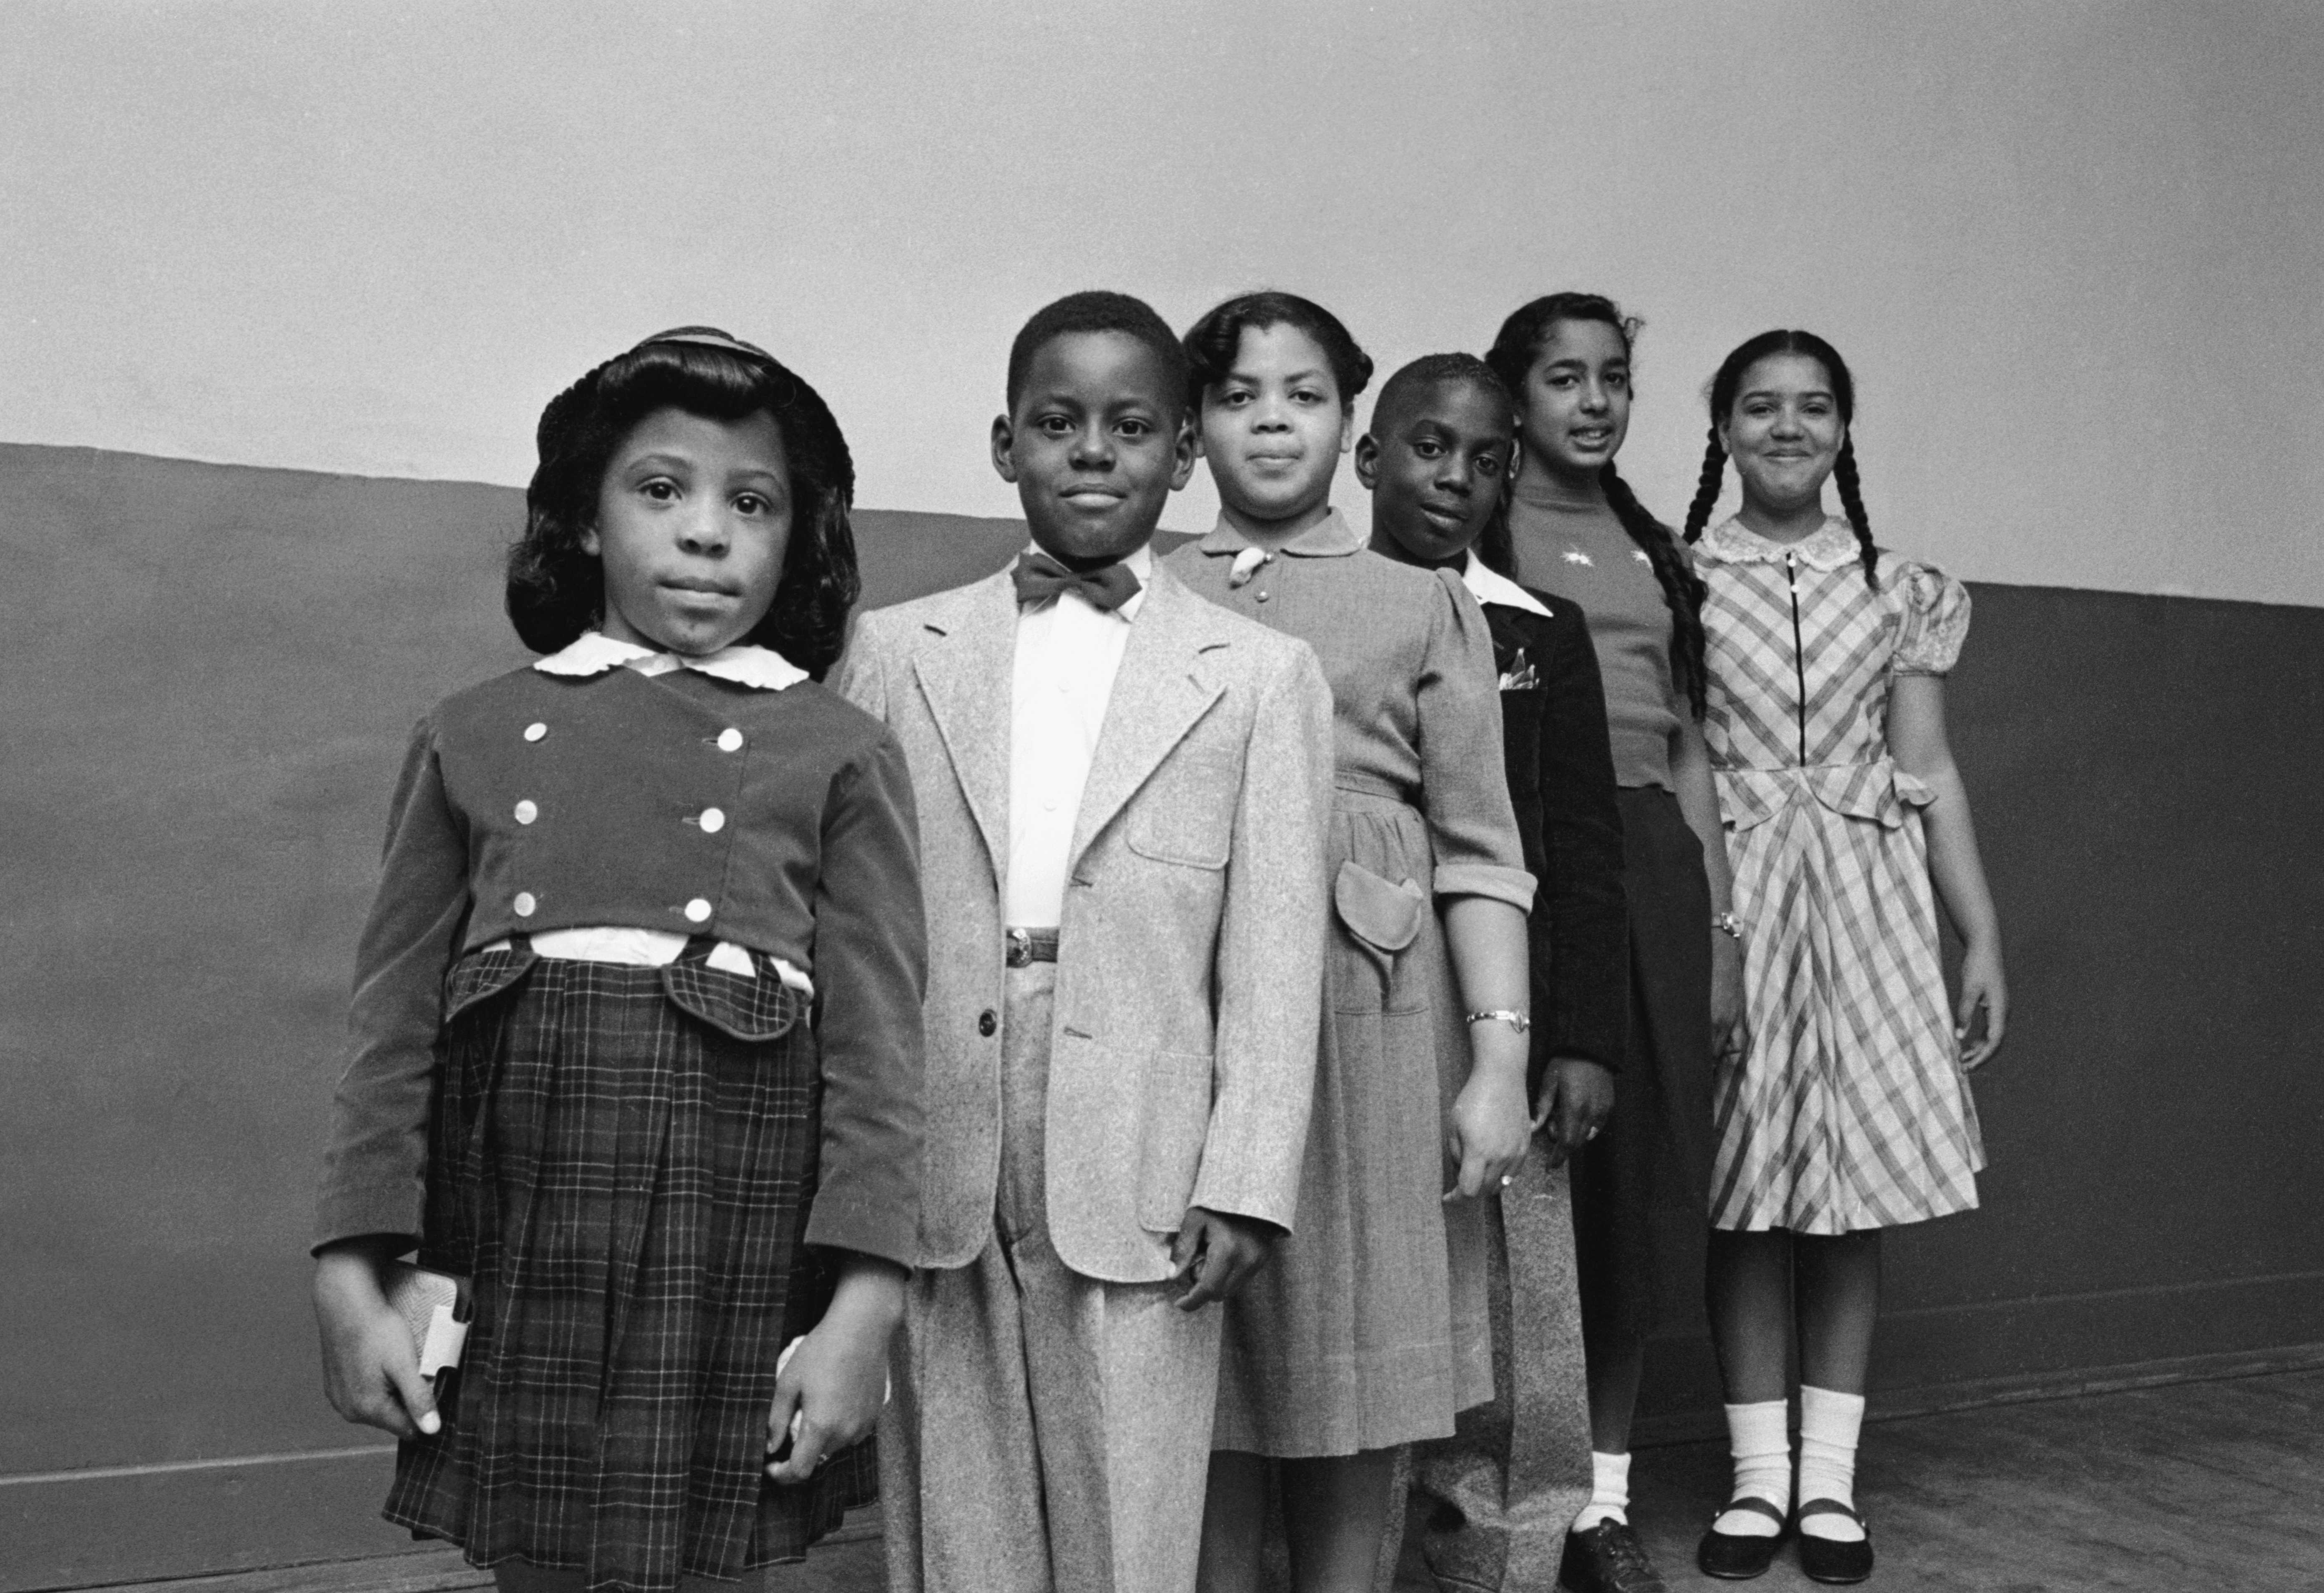 Black and white photgraph of 6 Black children standing in a line with hands by theri side.  There are 2 boys and 4 girls pictured.  The children are dressed up for school and look directly at the camera